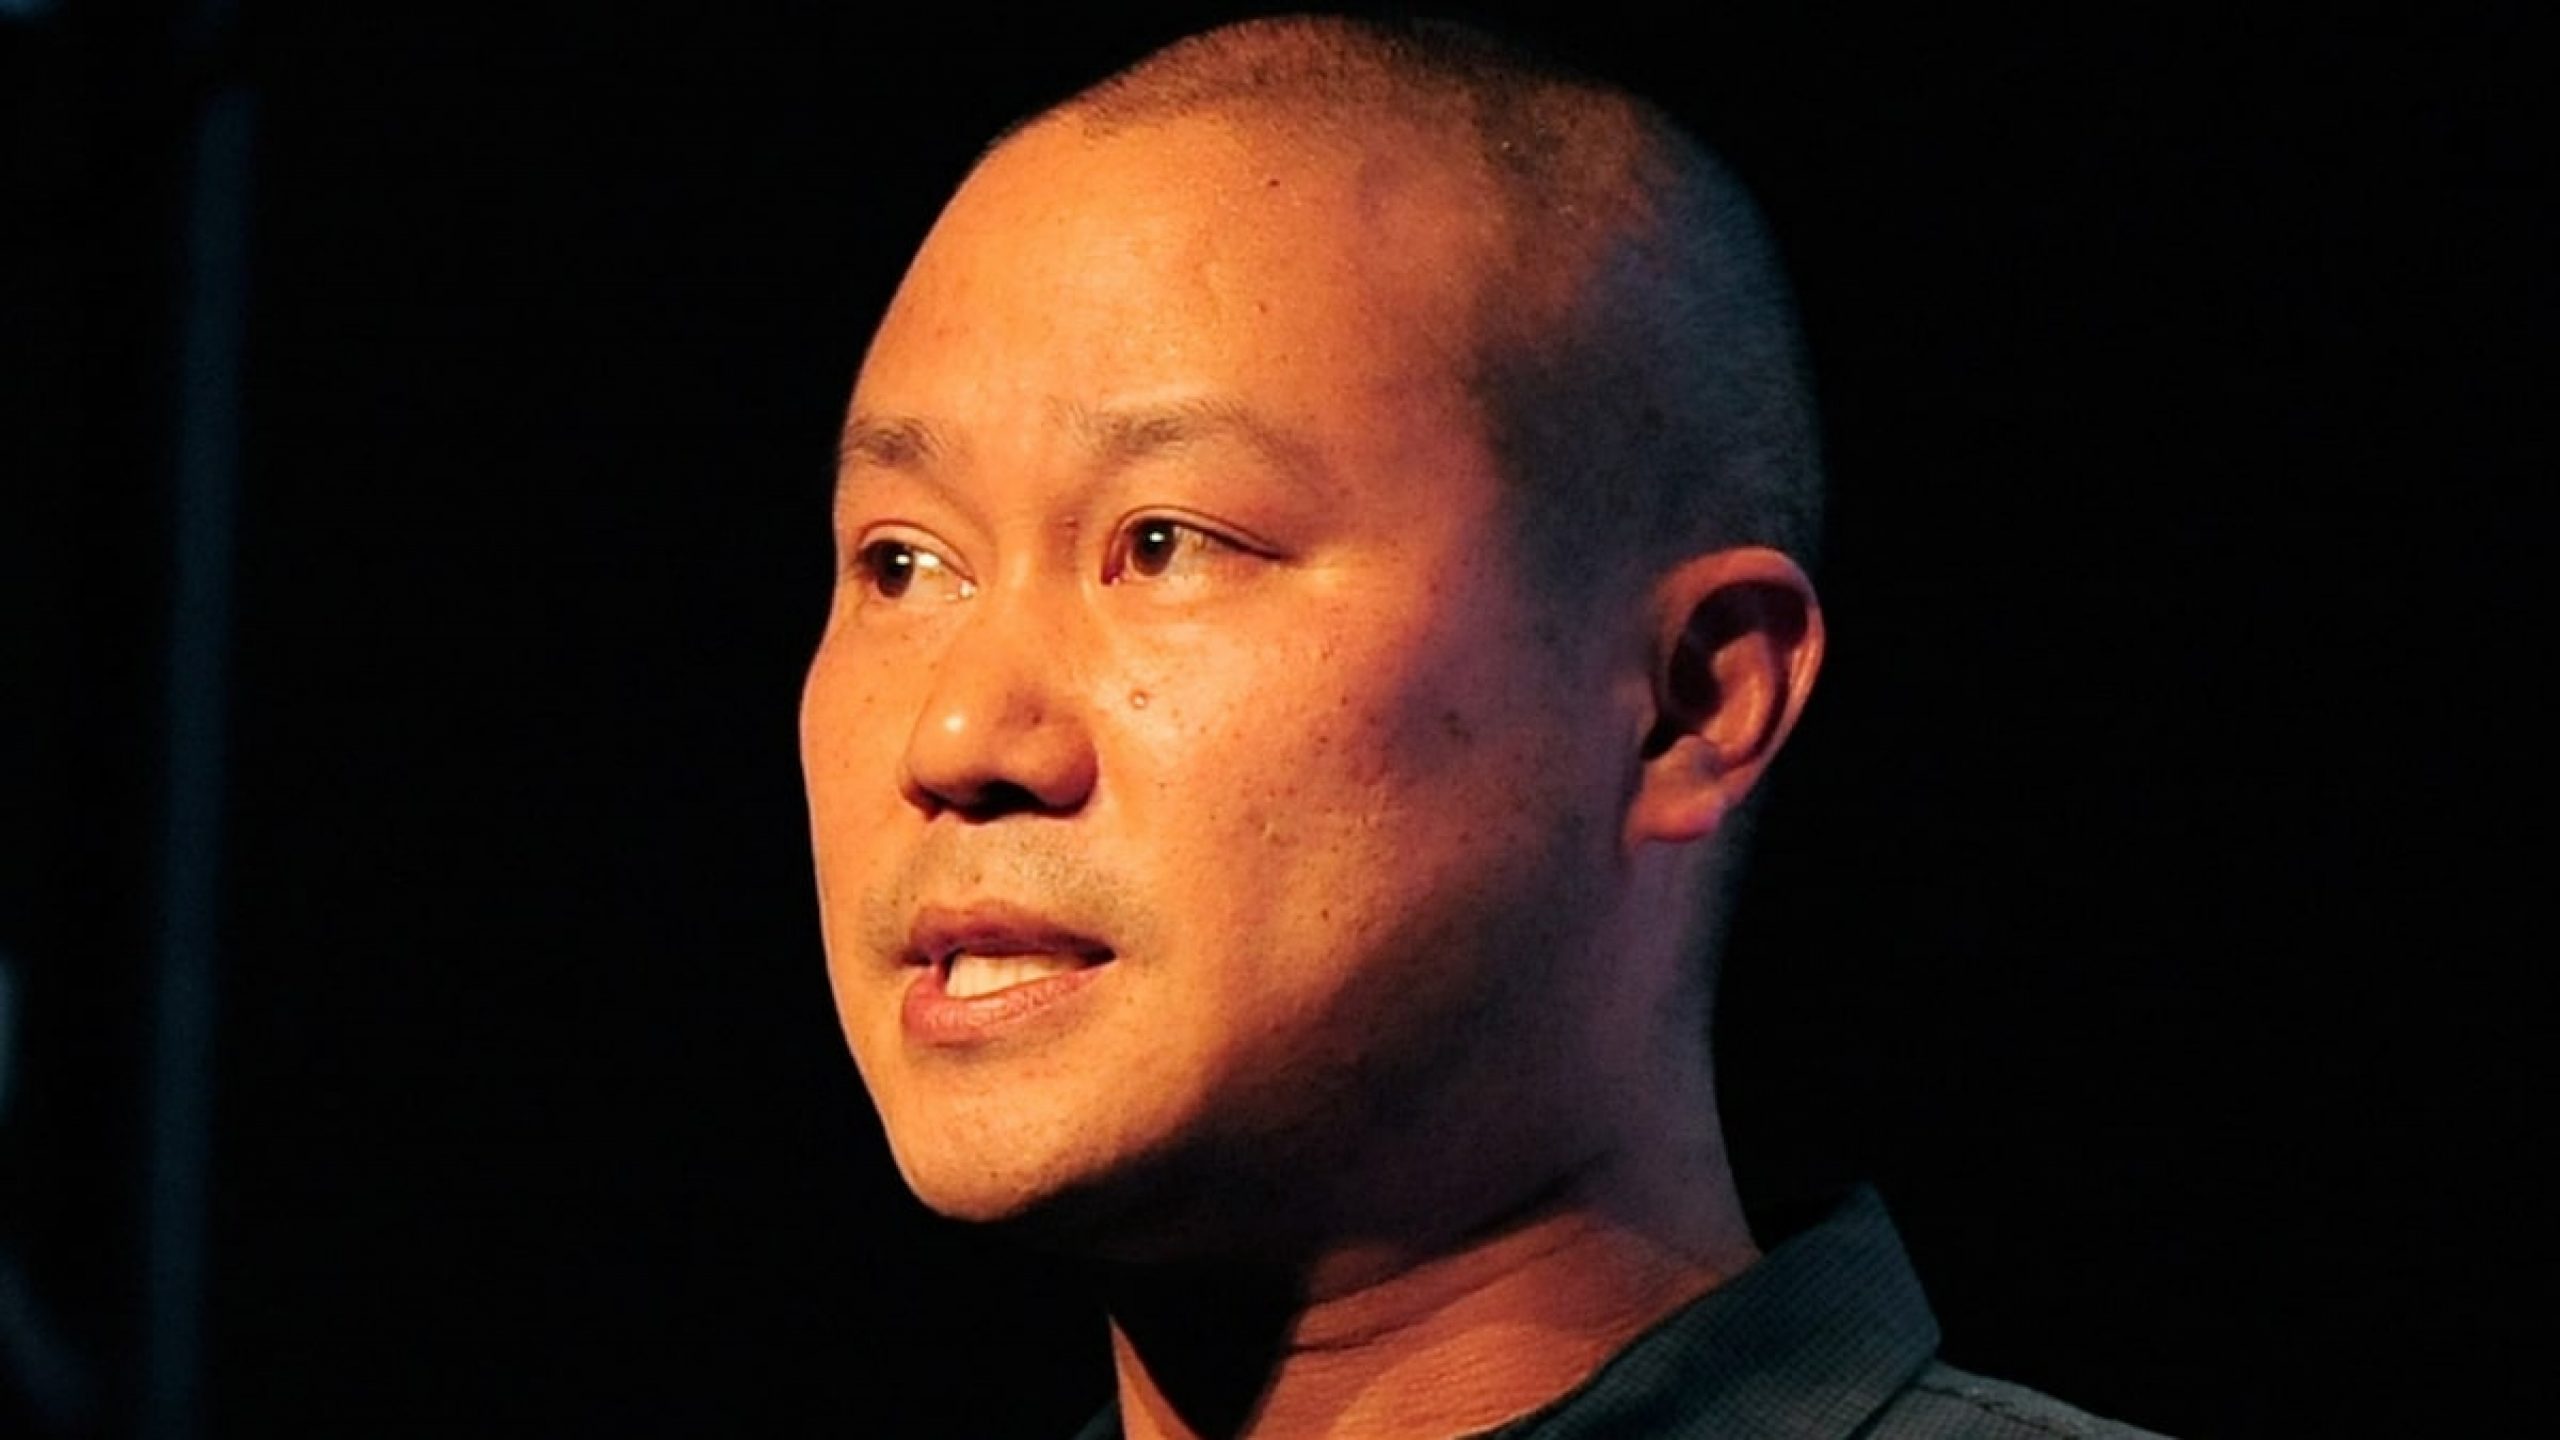 Ex-Zappos CEO Tony Hsieh’s Estate Hit with $40k Bill for Brain Artwork